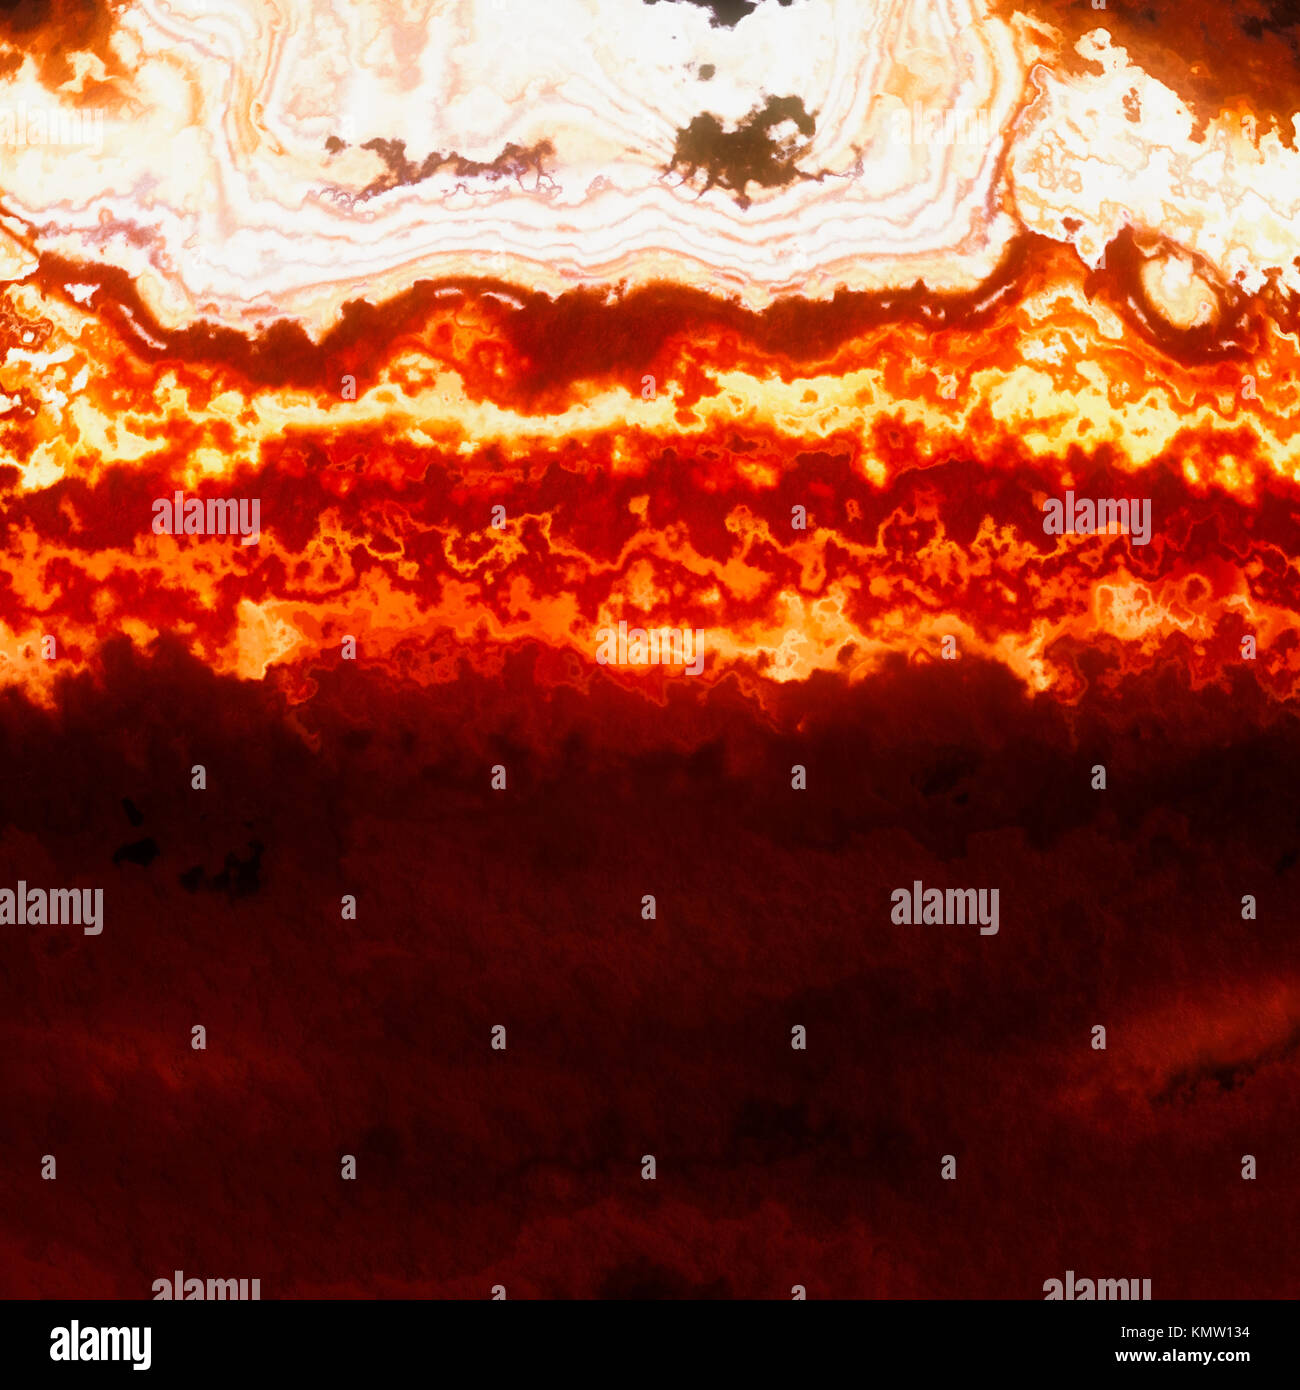 Burning flames and gases cross section, abstract background illustration Stock Photo